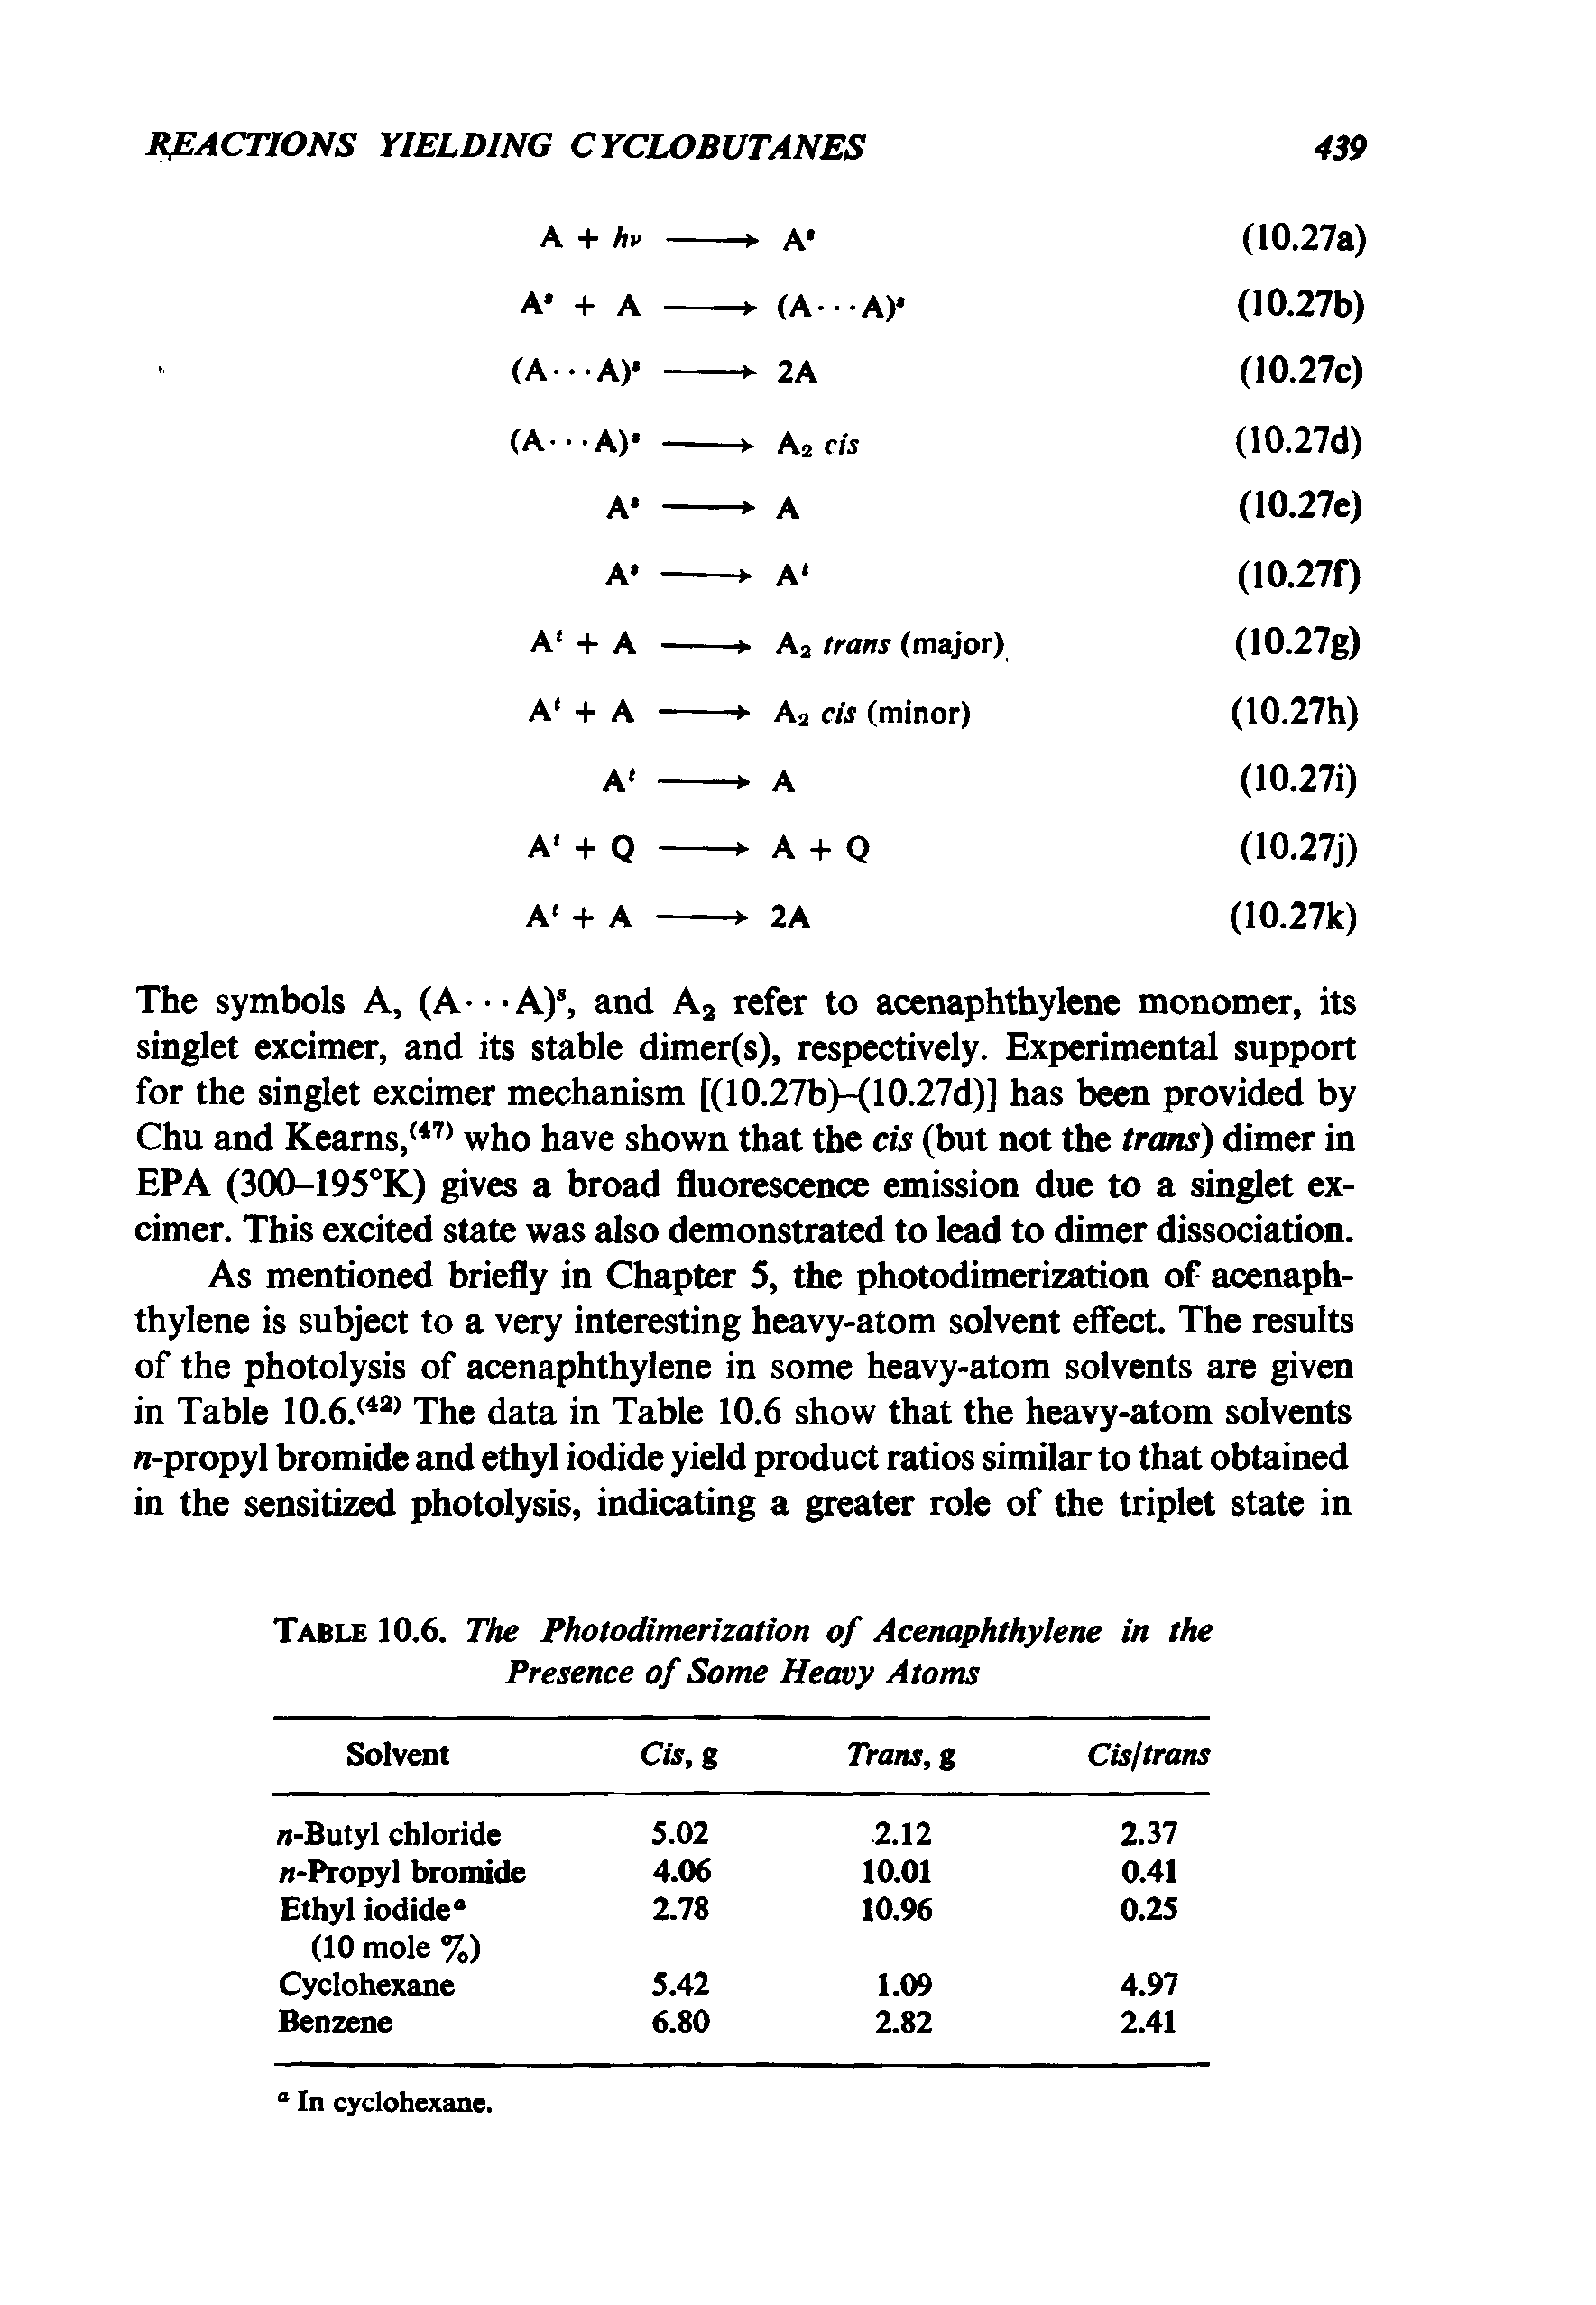 Table 10.6. The Photodimerization of Acenaphthylene in the Presence of Some Heavy Atoms...